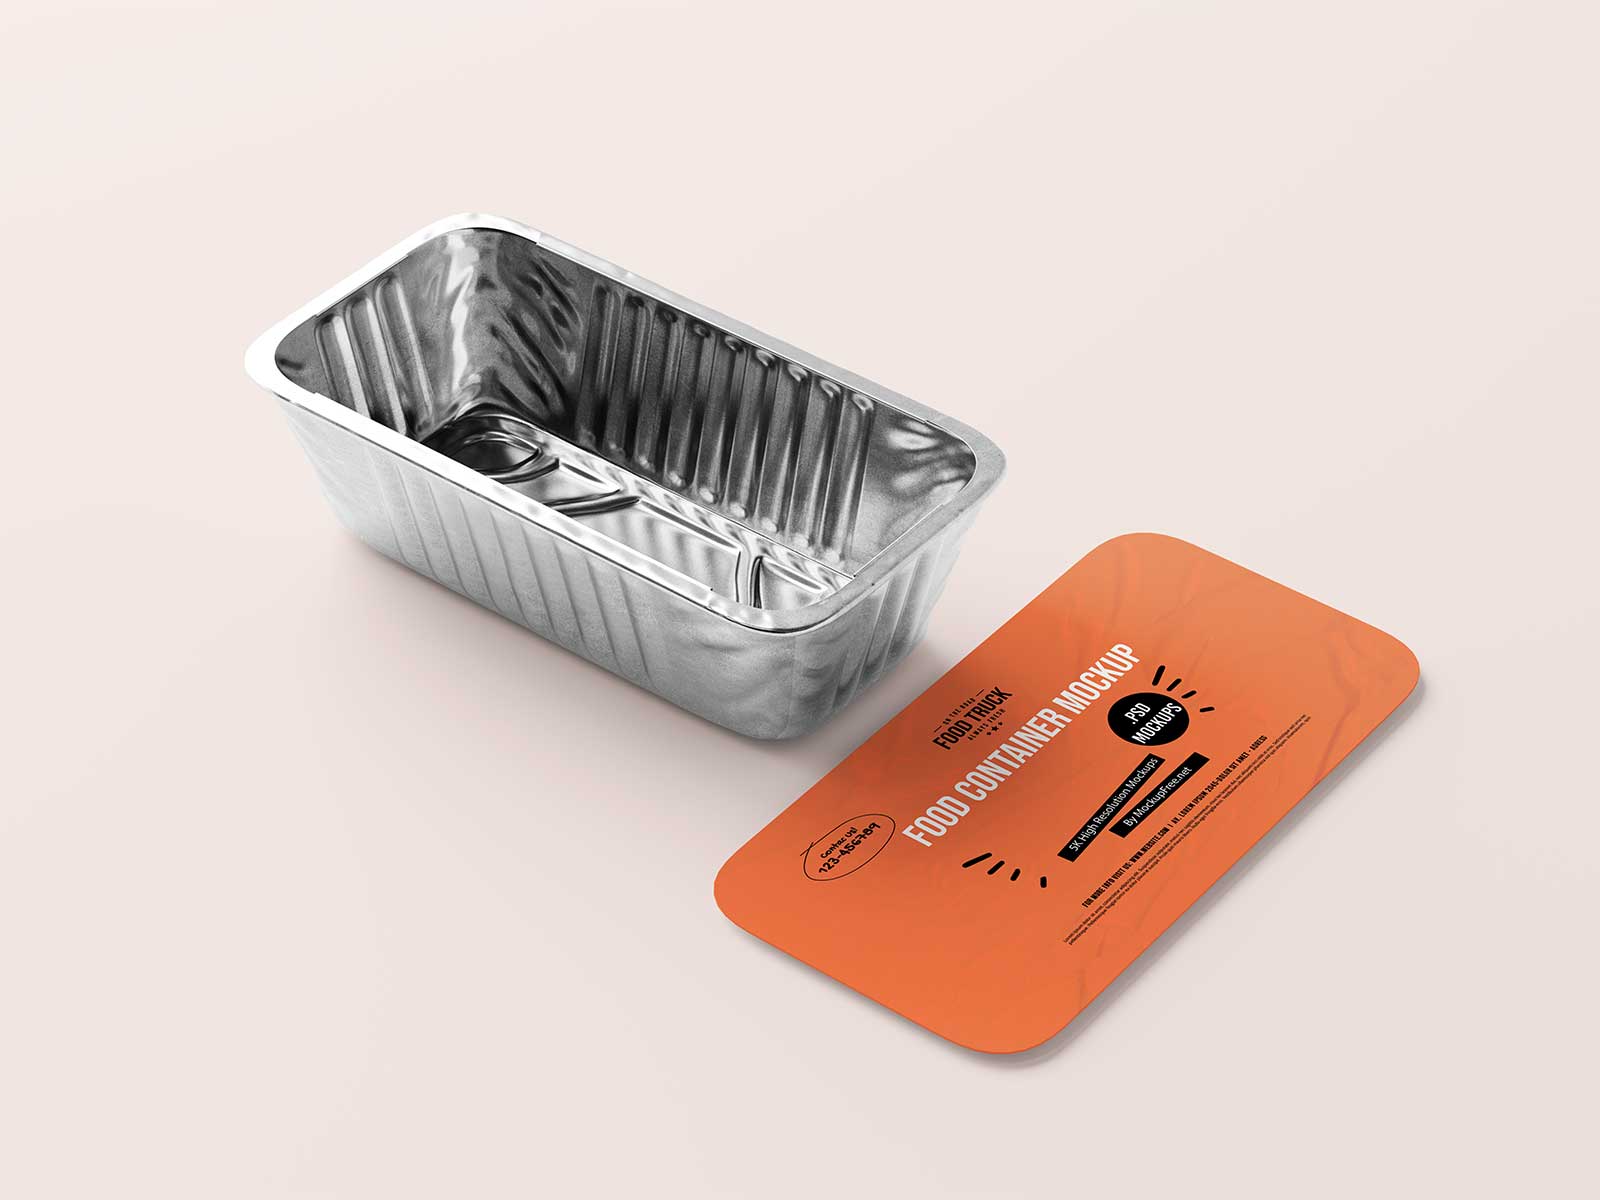 Aluminum Food Container Mockup: Present Your Culinary Creations with Style